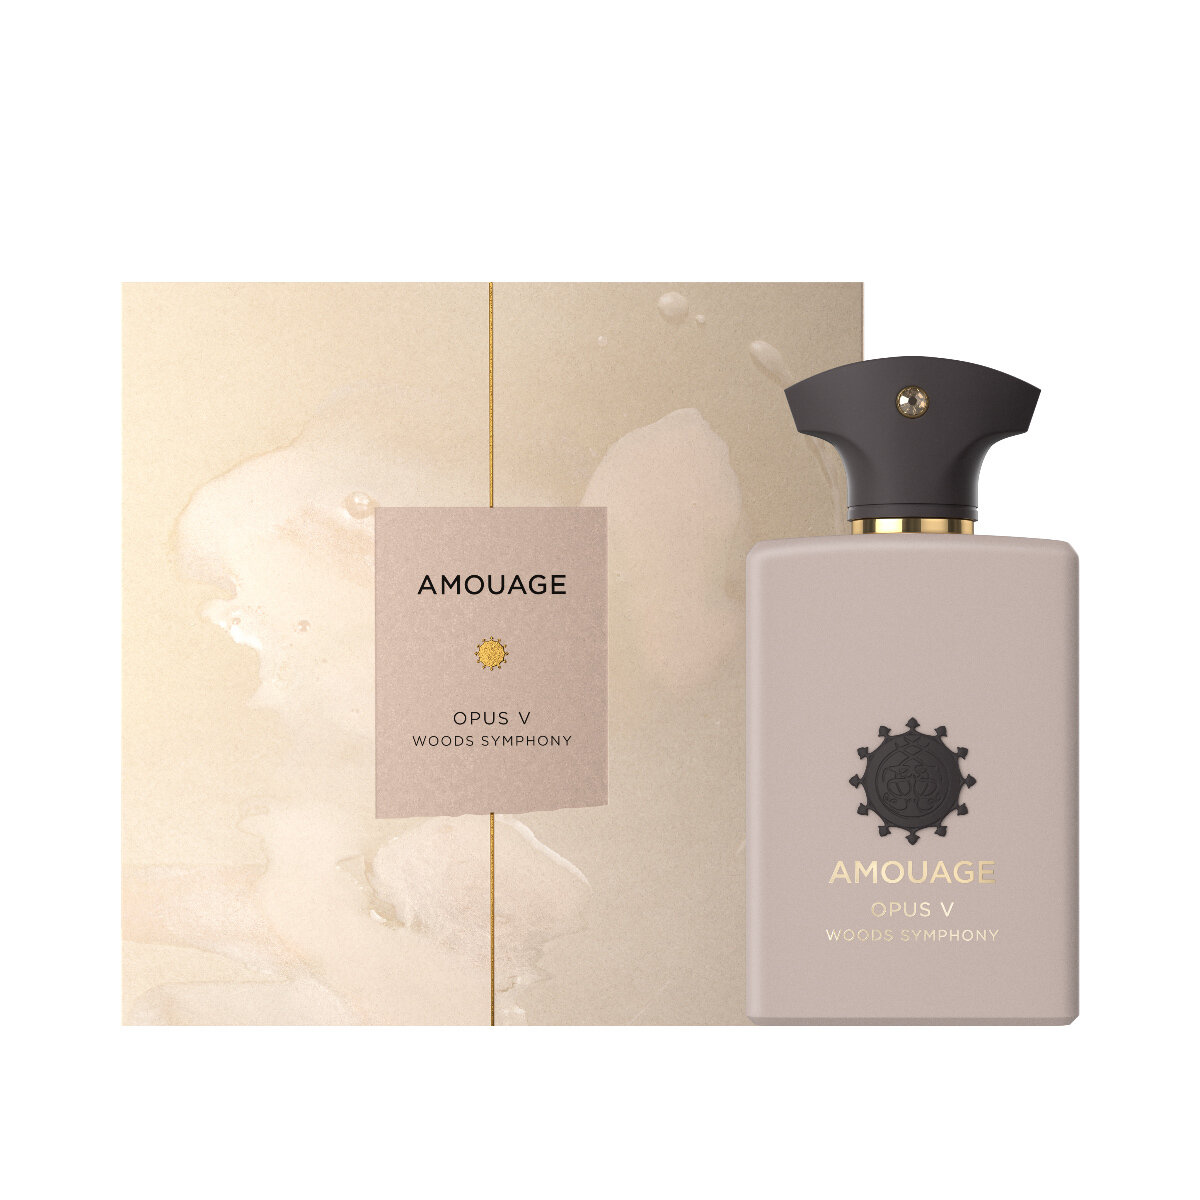 Amouage Library Collection Opus V Woods Symphony парфюмерная вода 100 мл унисекс